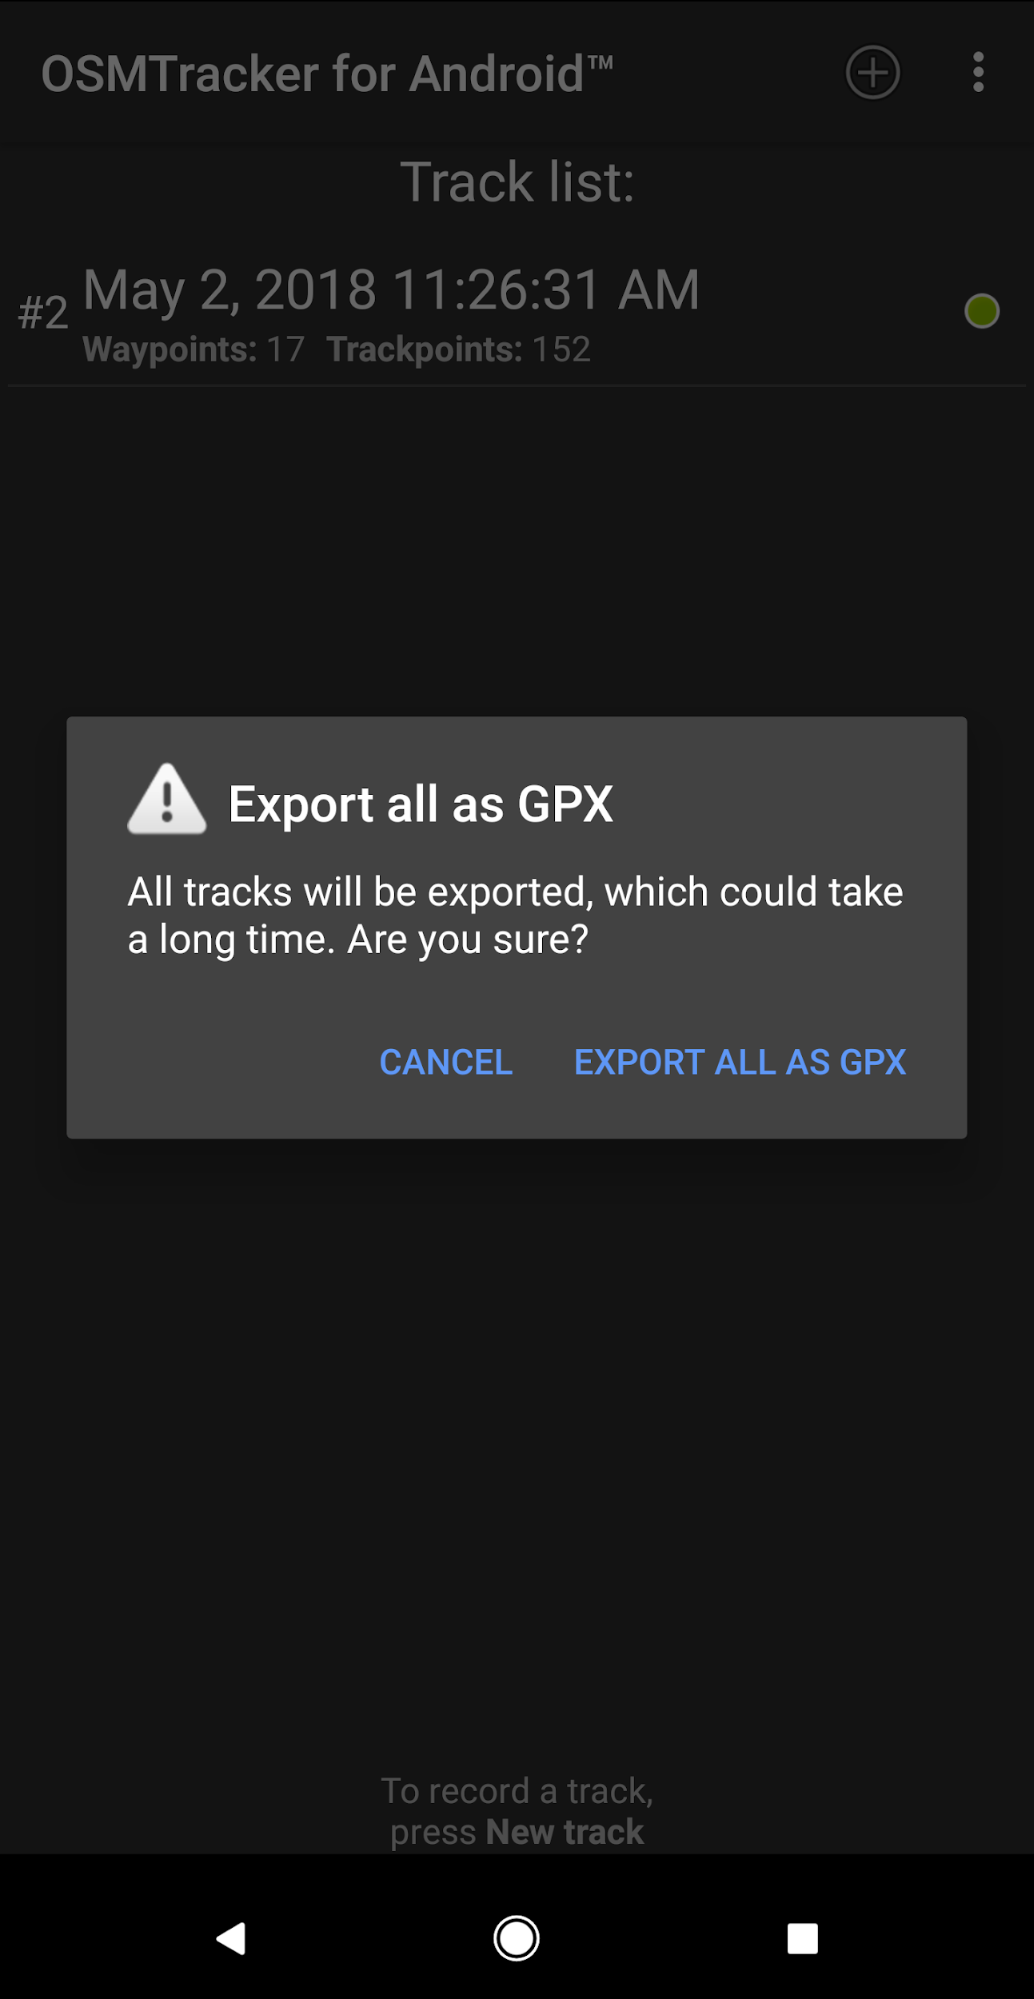 Export all as GPX